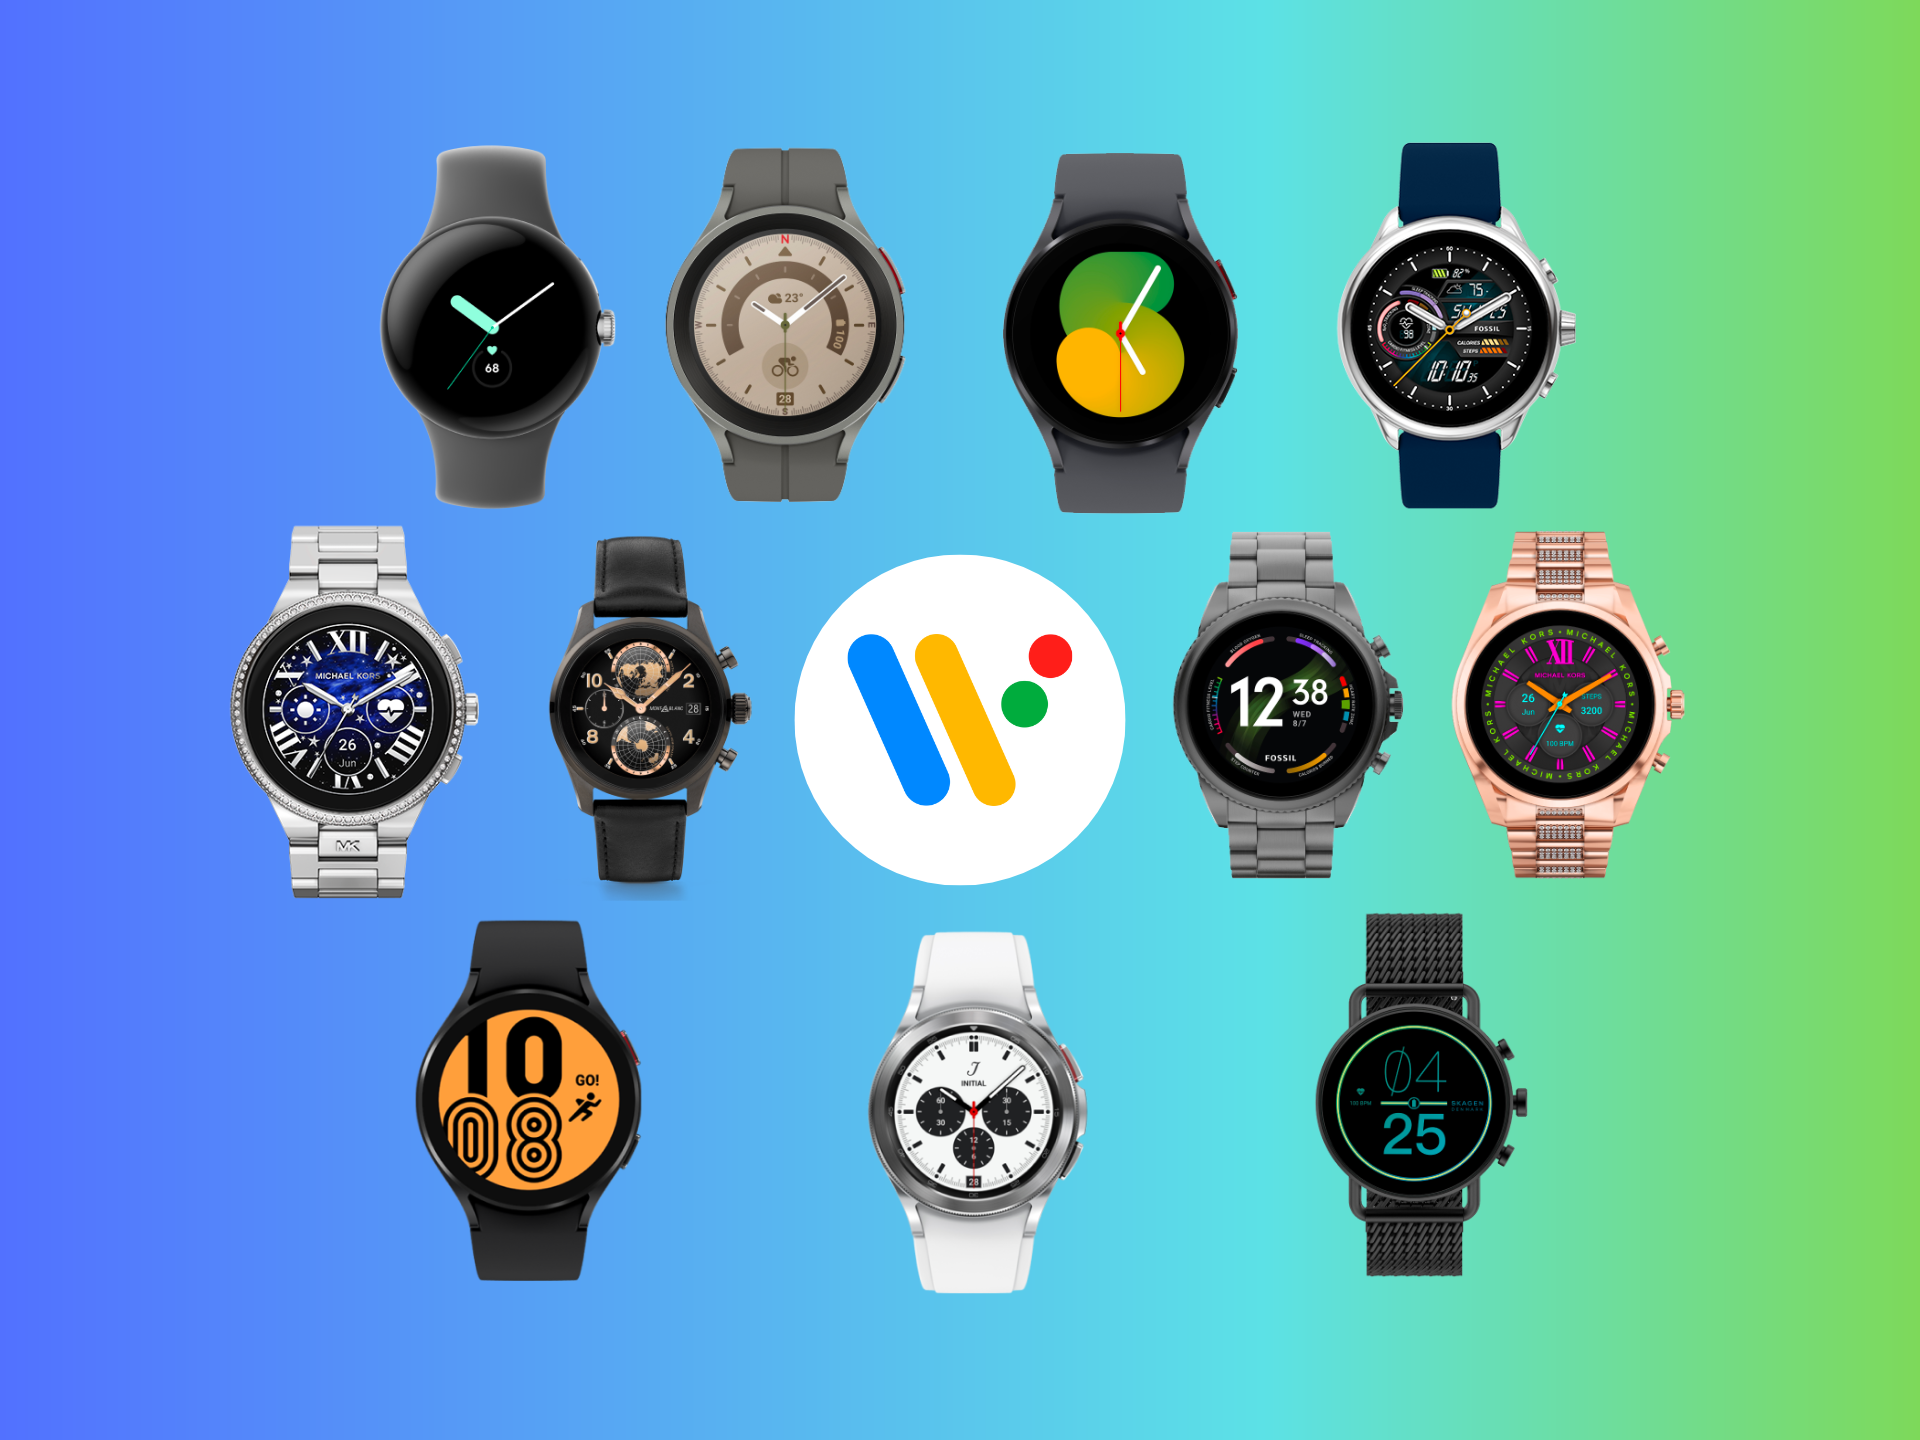 Wear OS 3: Features, eligible smartwatches, and more